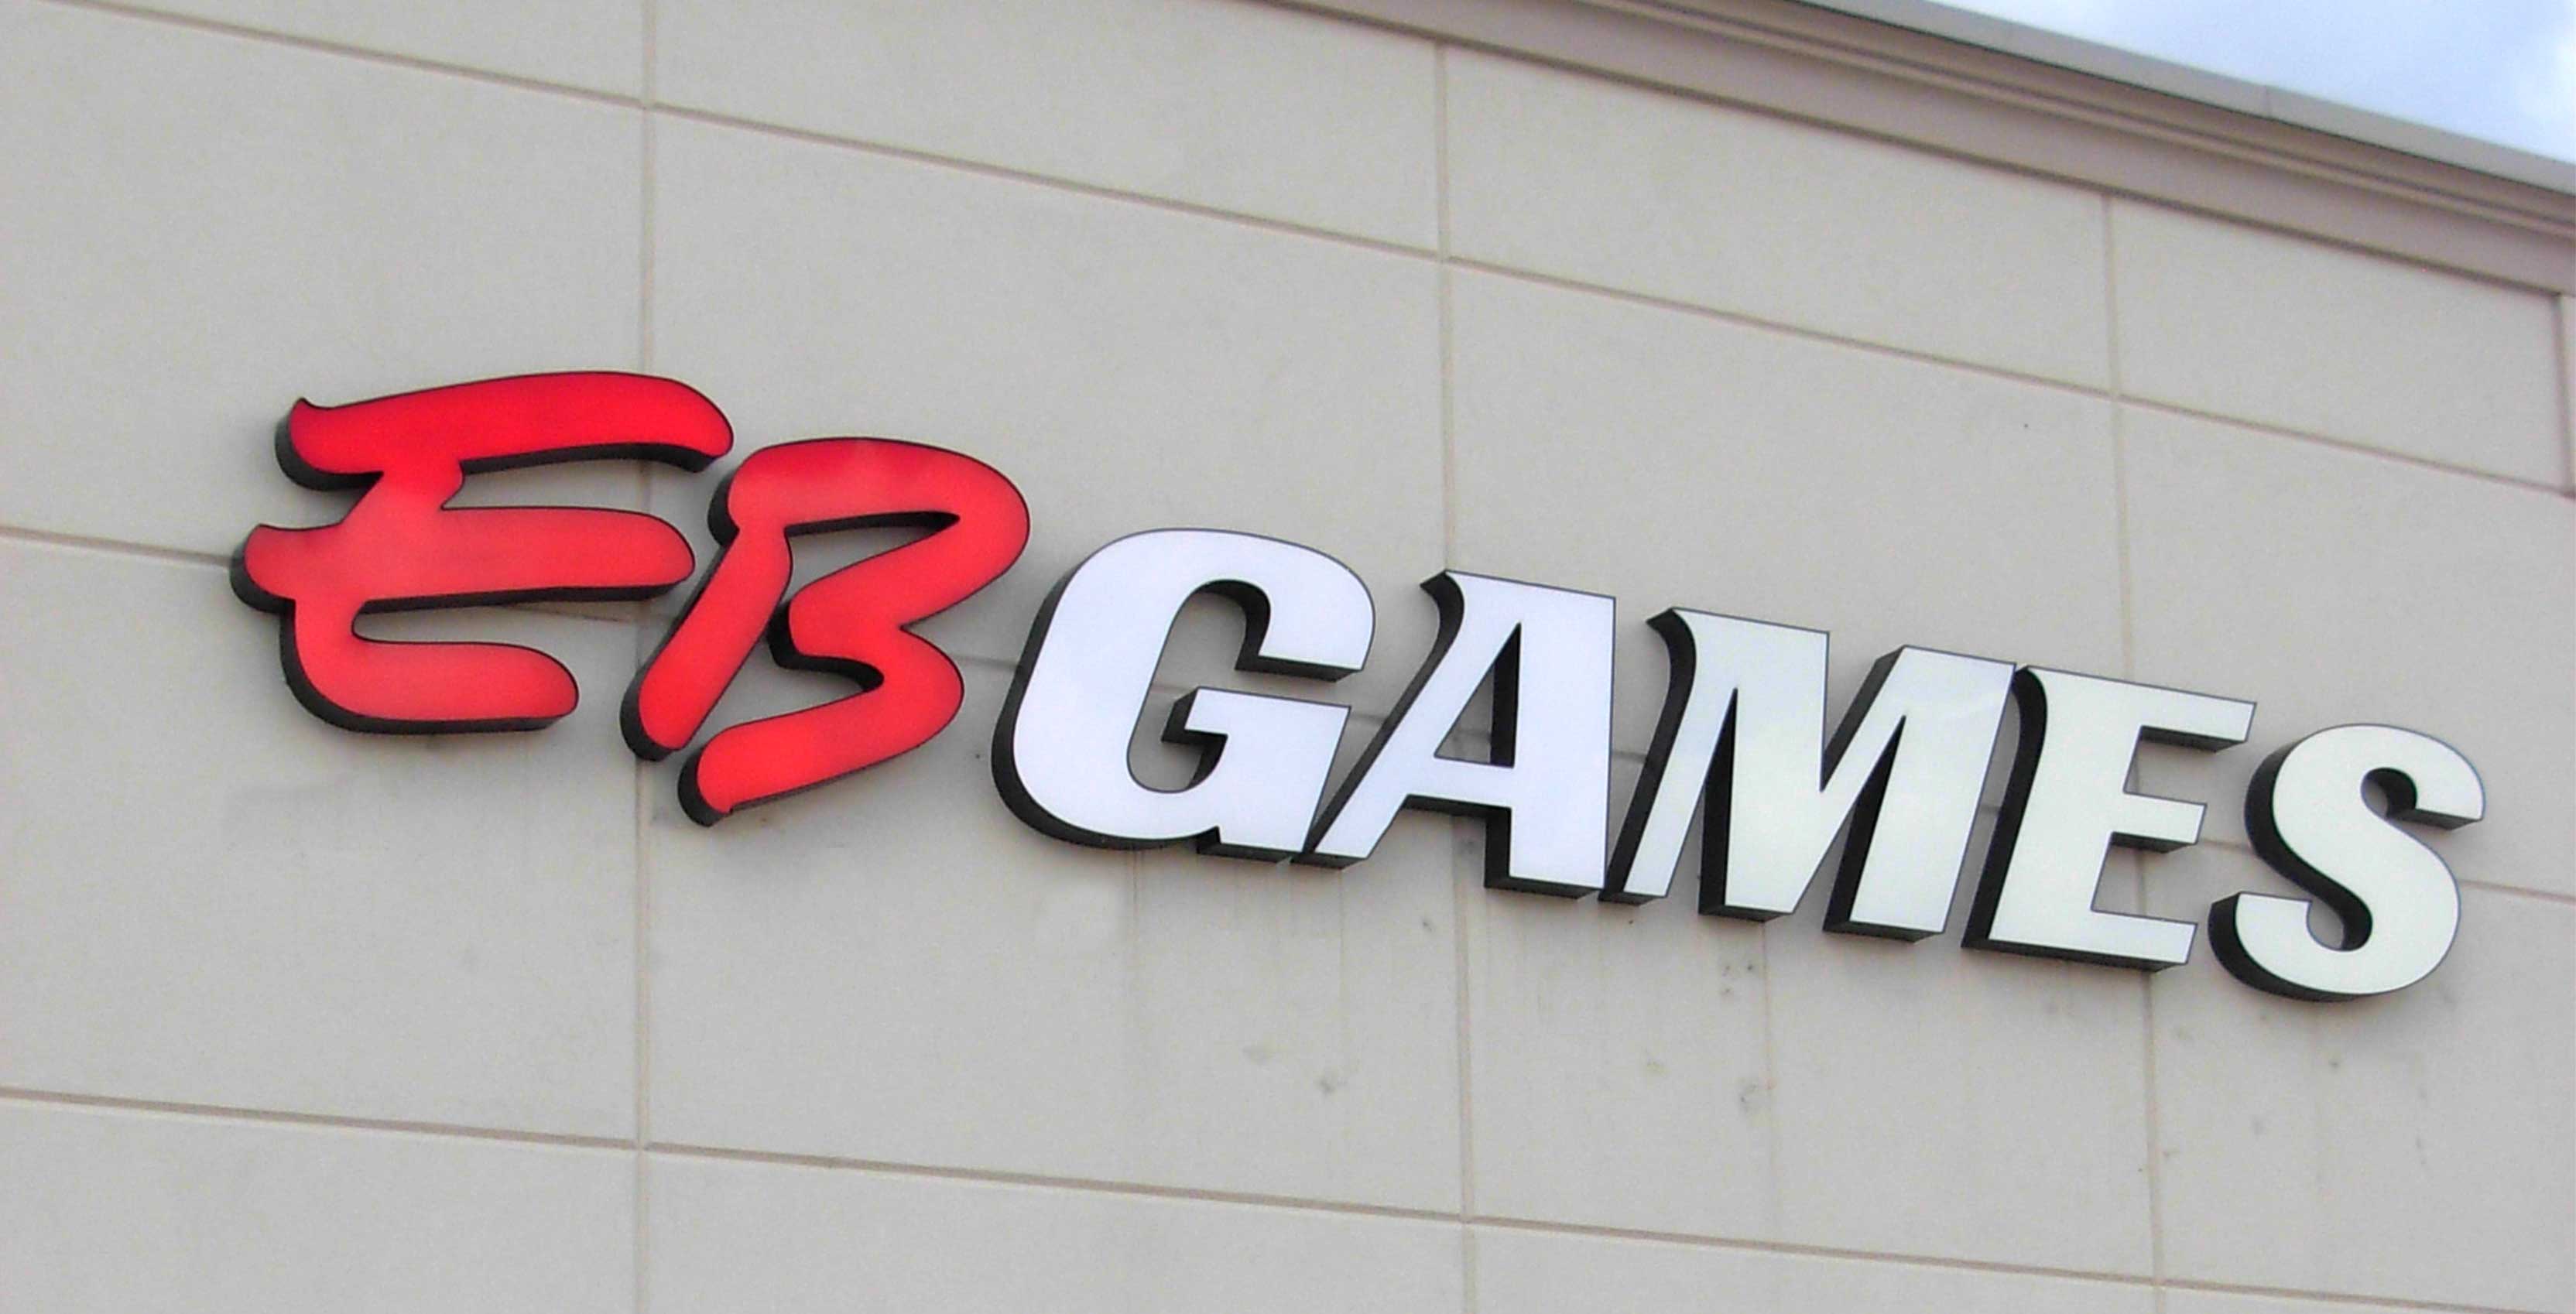 EB Games sign on building